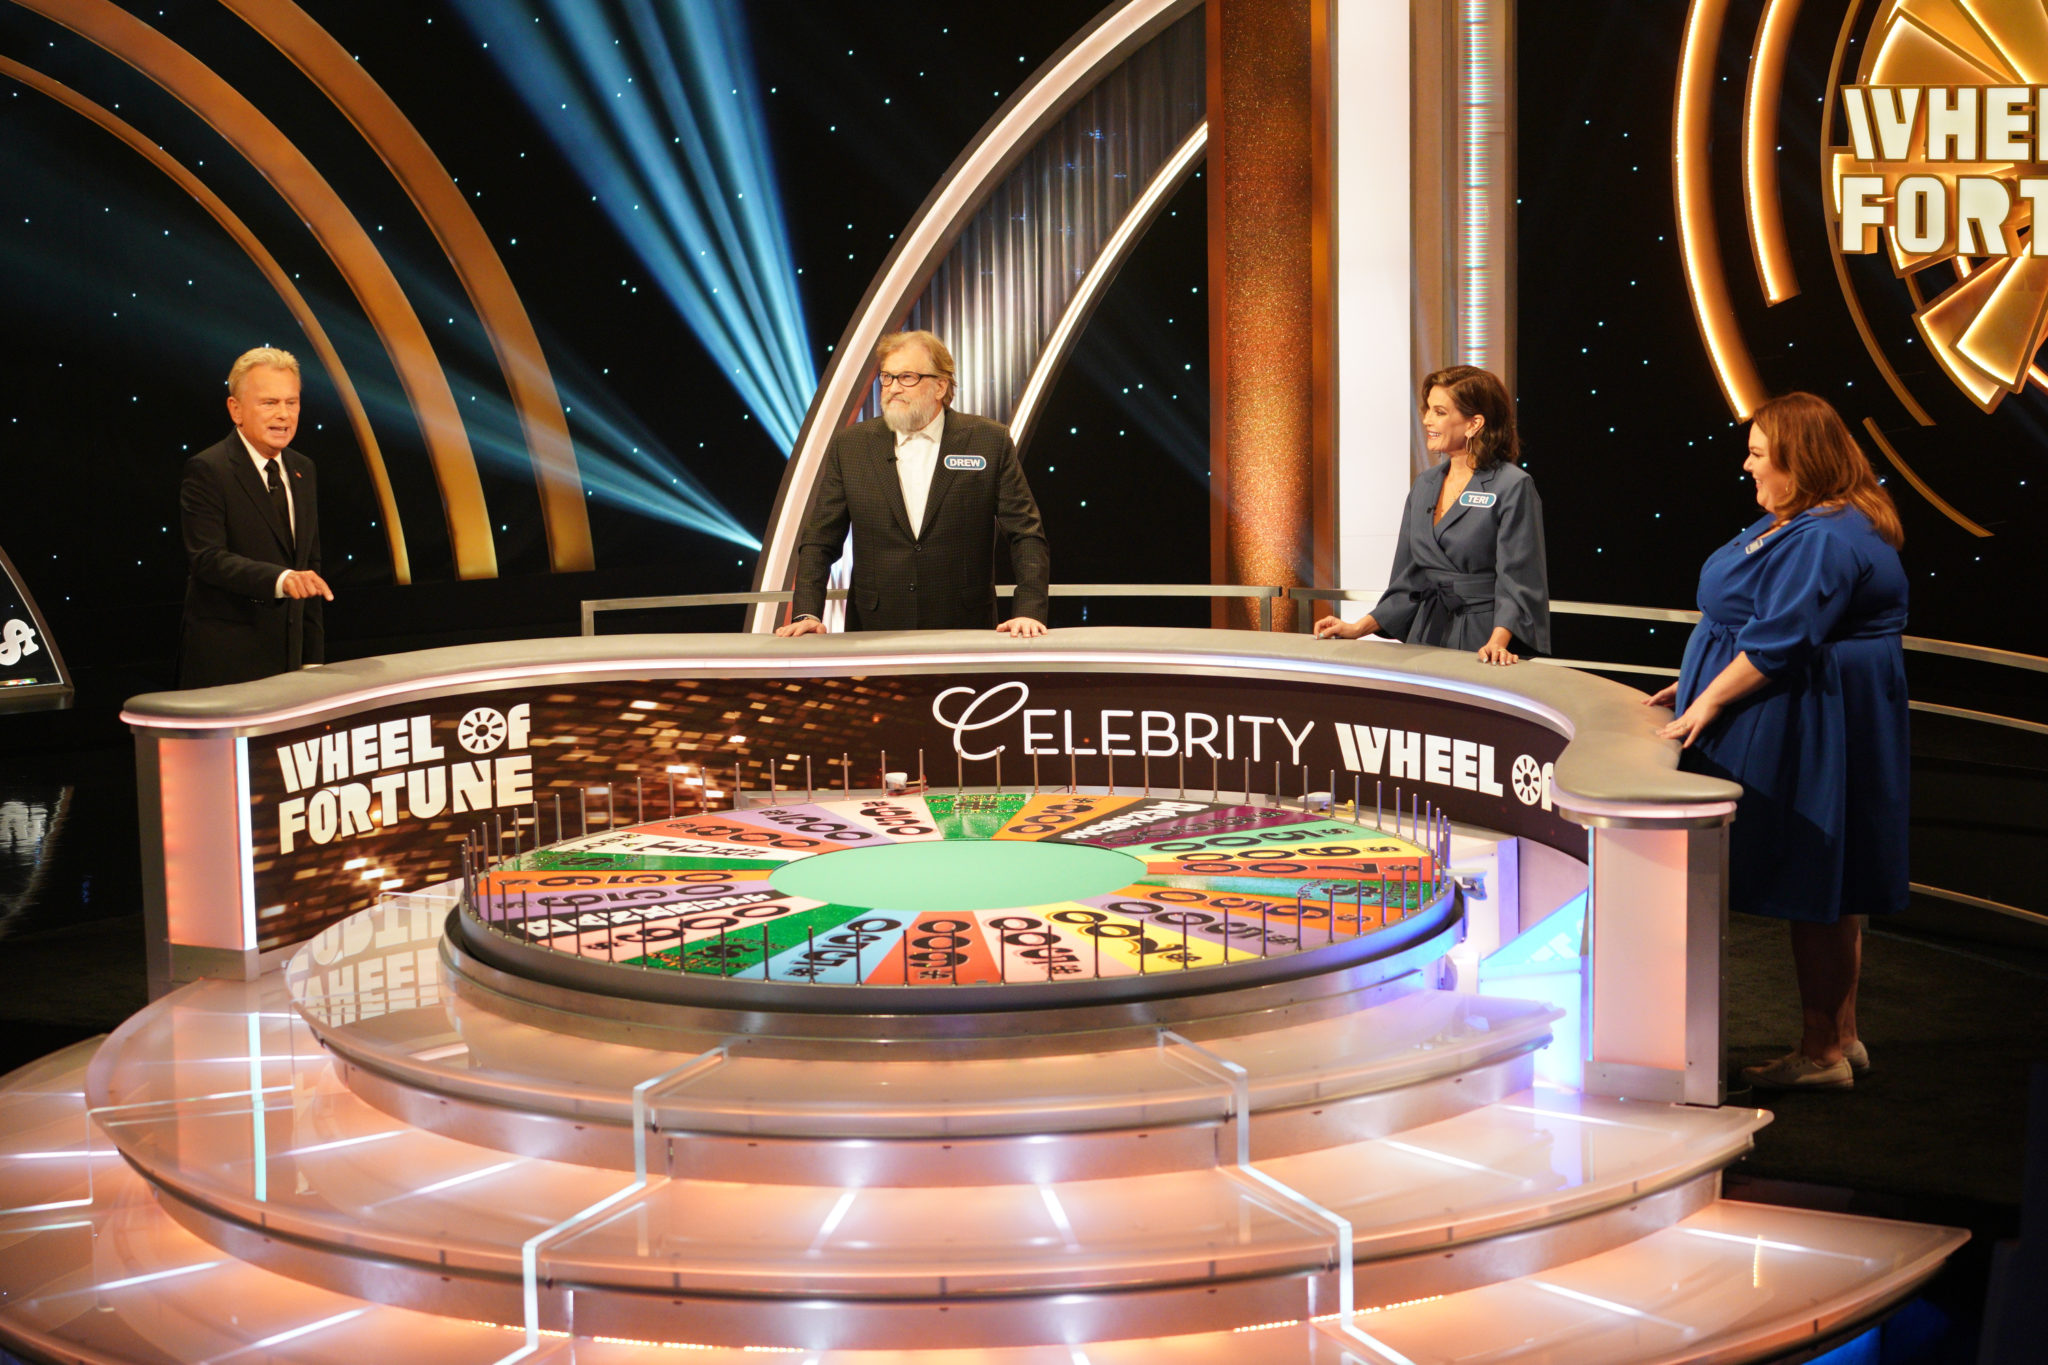 Celebrity Wheel of Fortune TV Show on ABC Season One Viewer Votes